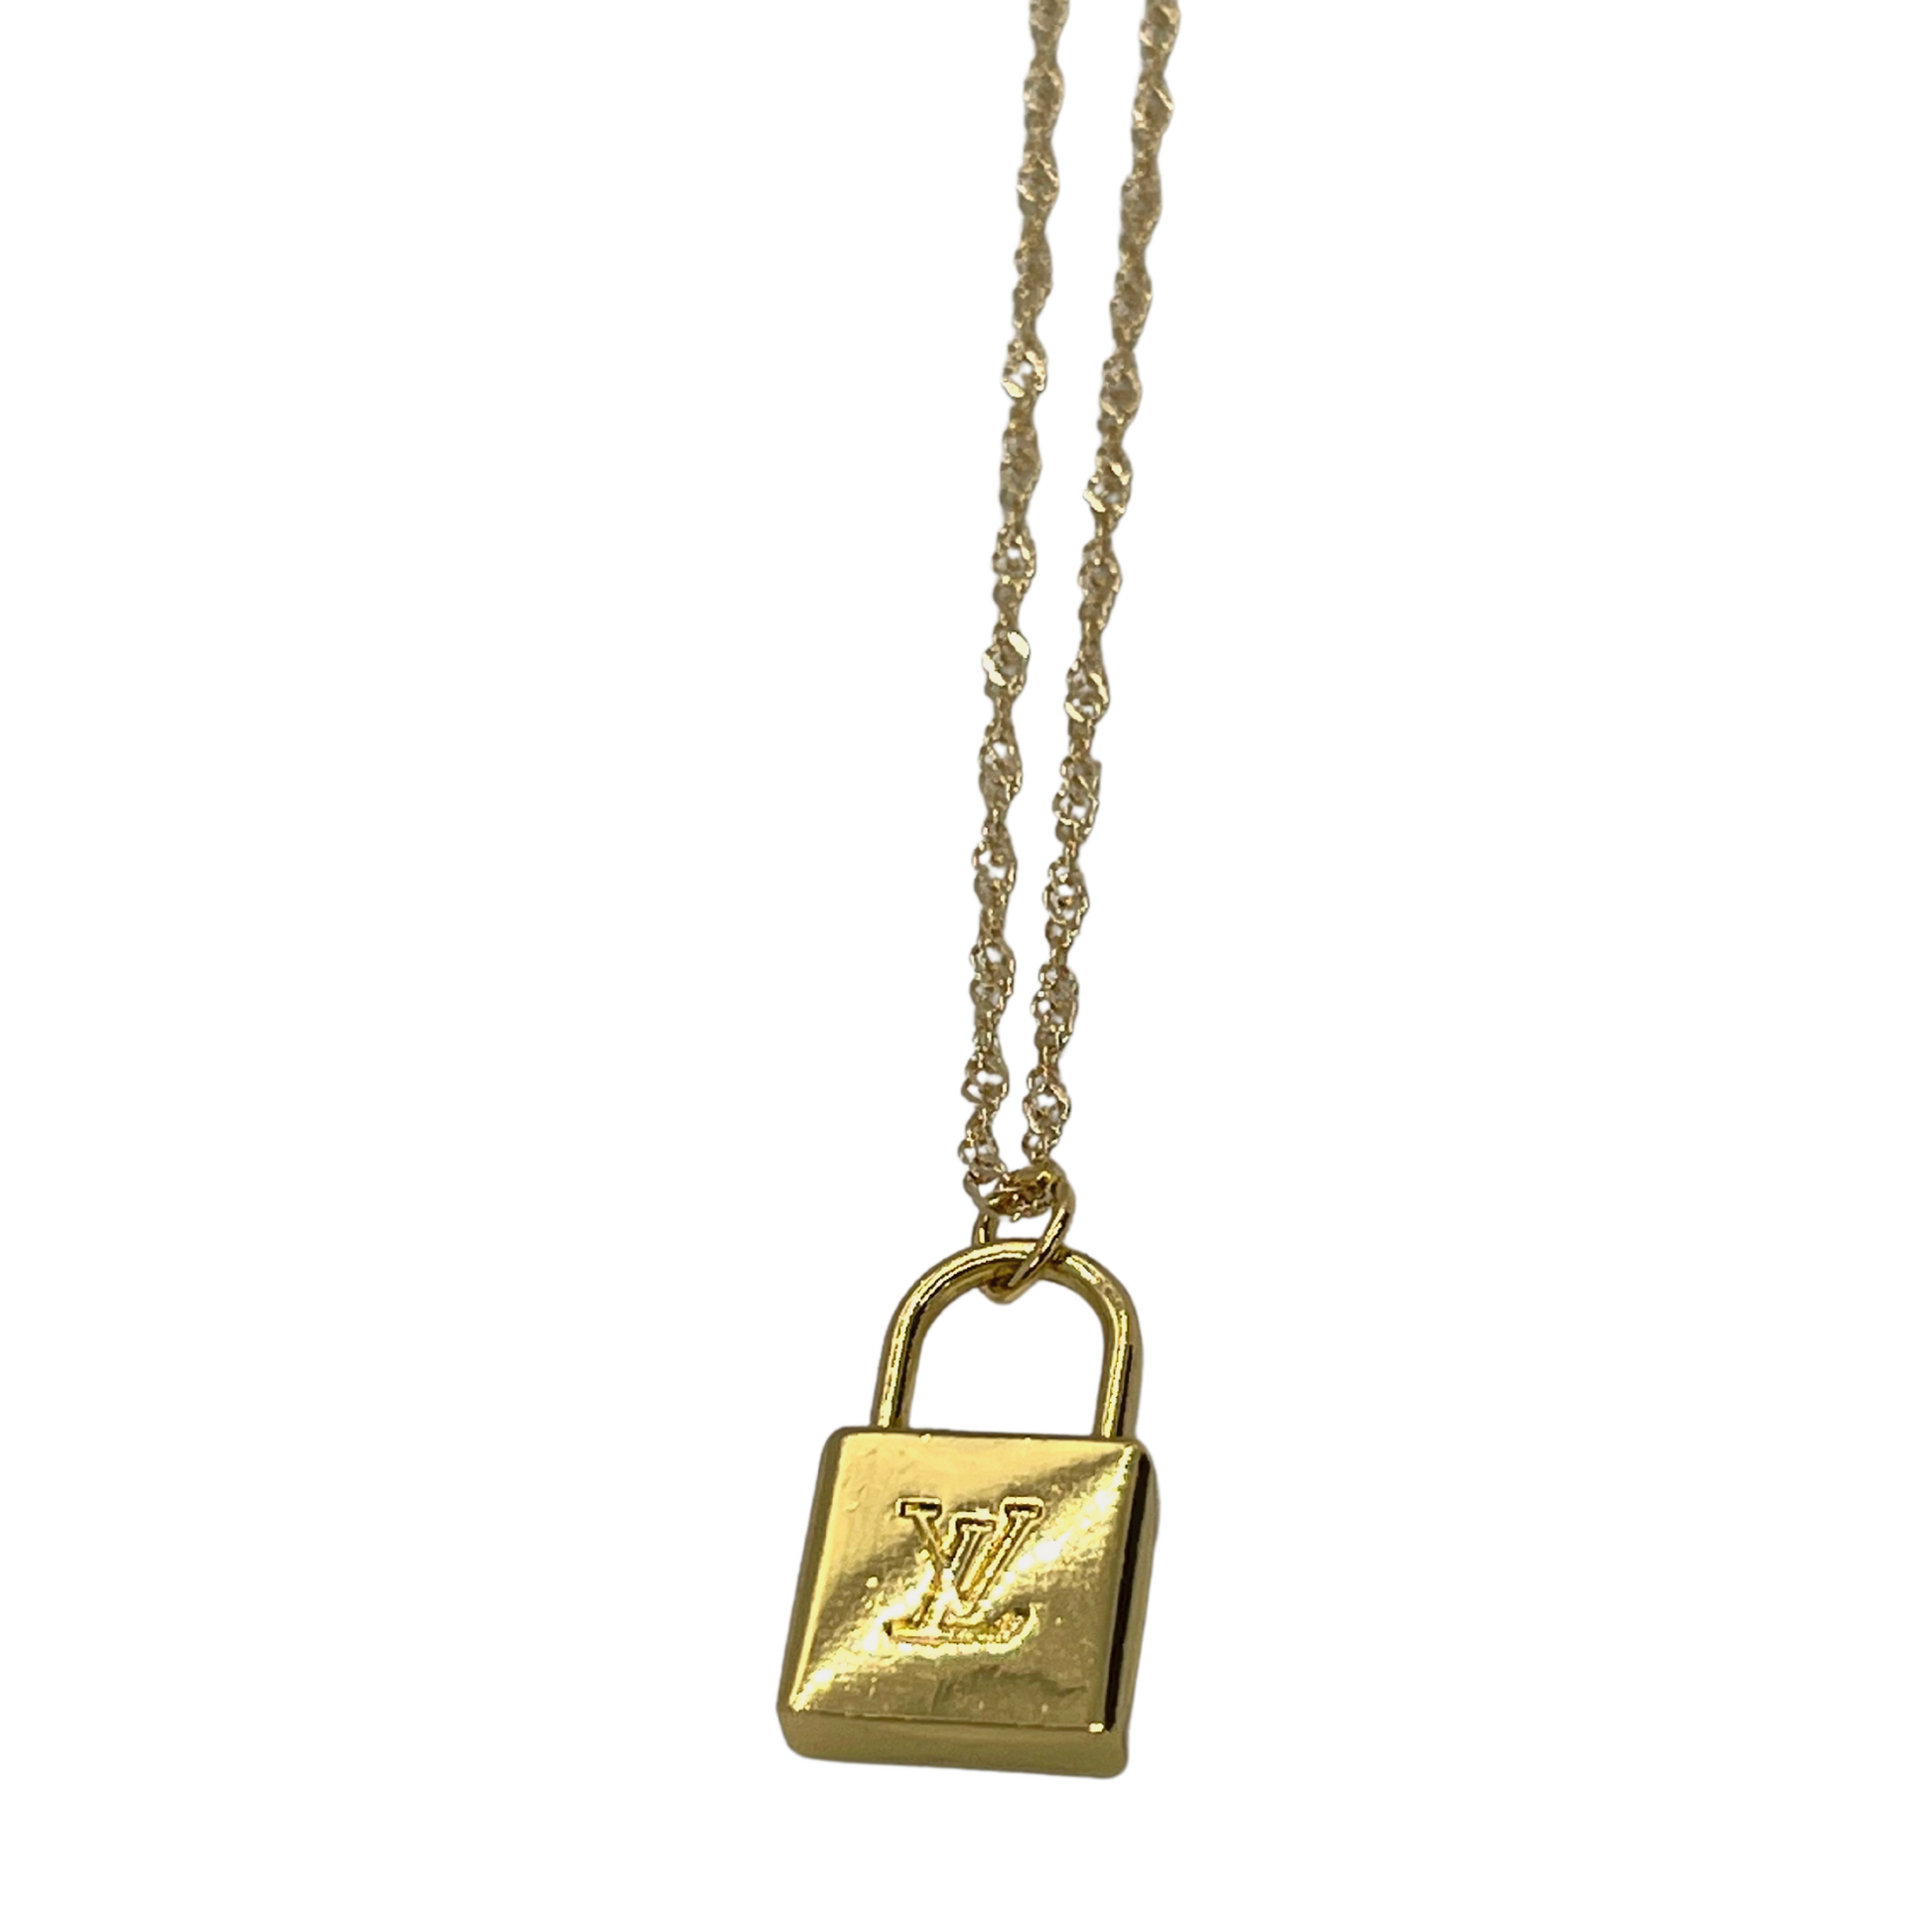 Authentic Lock Pendant | Reworked Gold Necklace – Serendipity Designs